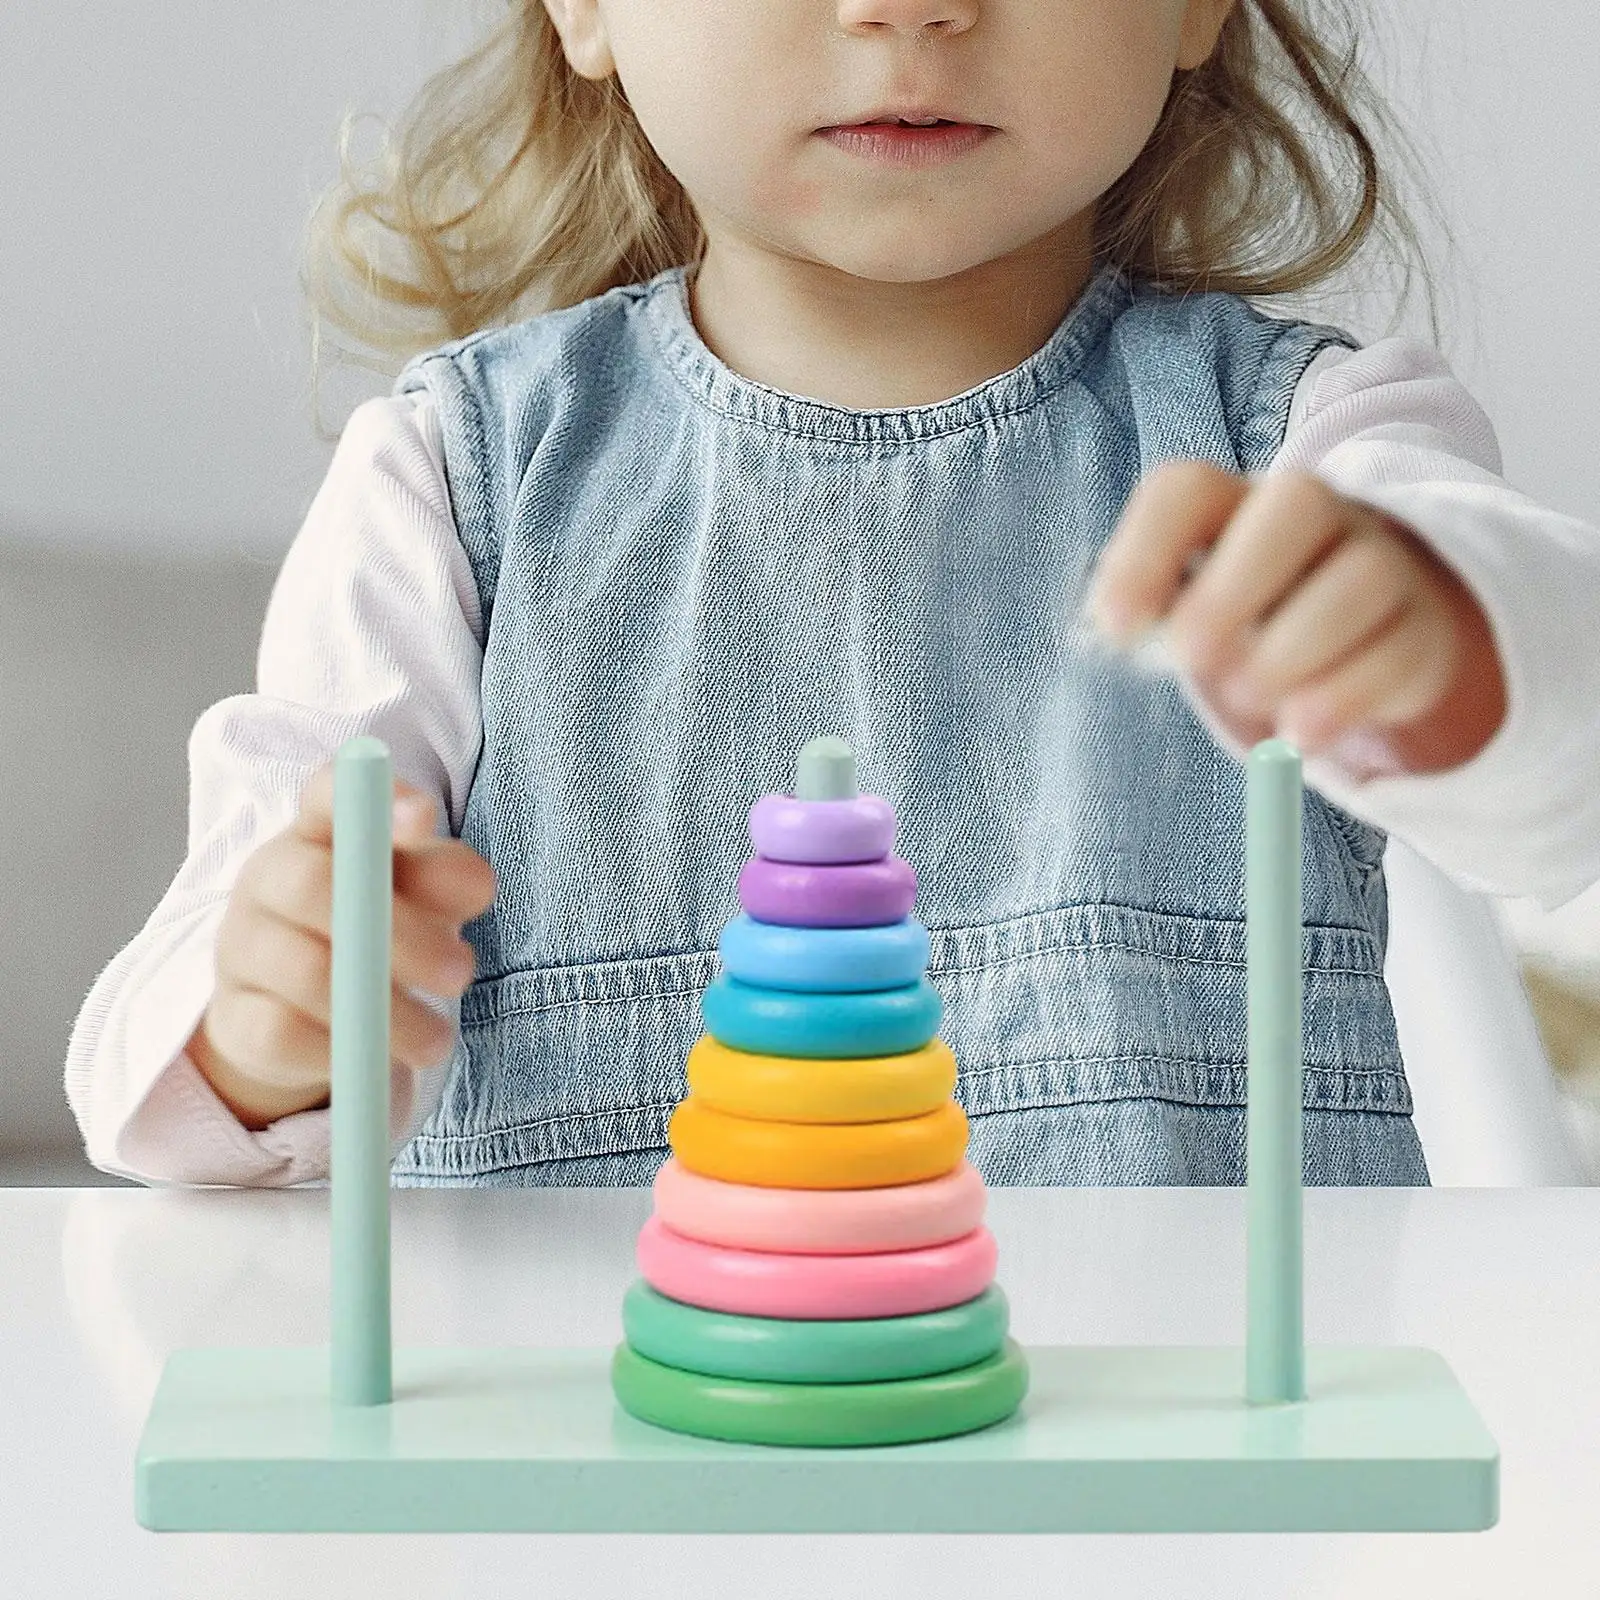 Rainbow Stacking Rings Toy Intellectual Toy Learning Development Stacker Toy for Infant Ages 6+ Months Children Boy Girls Gifts